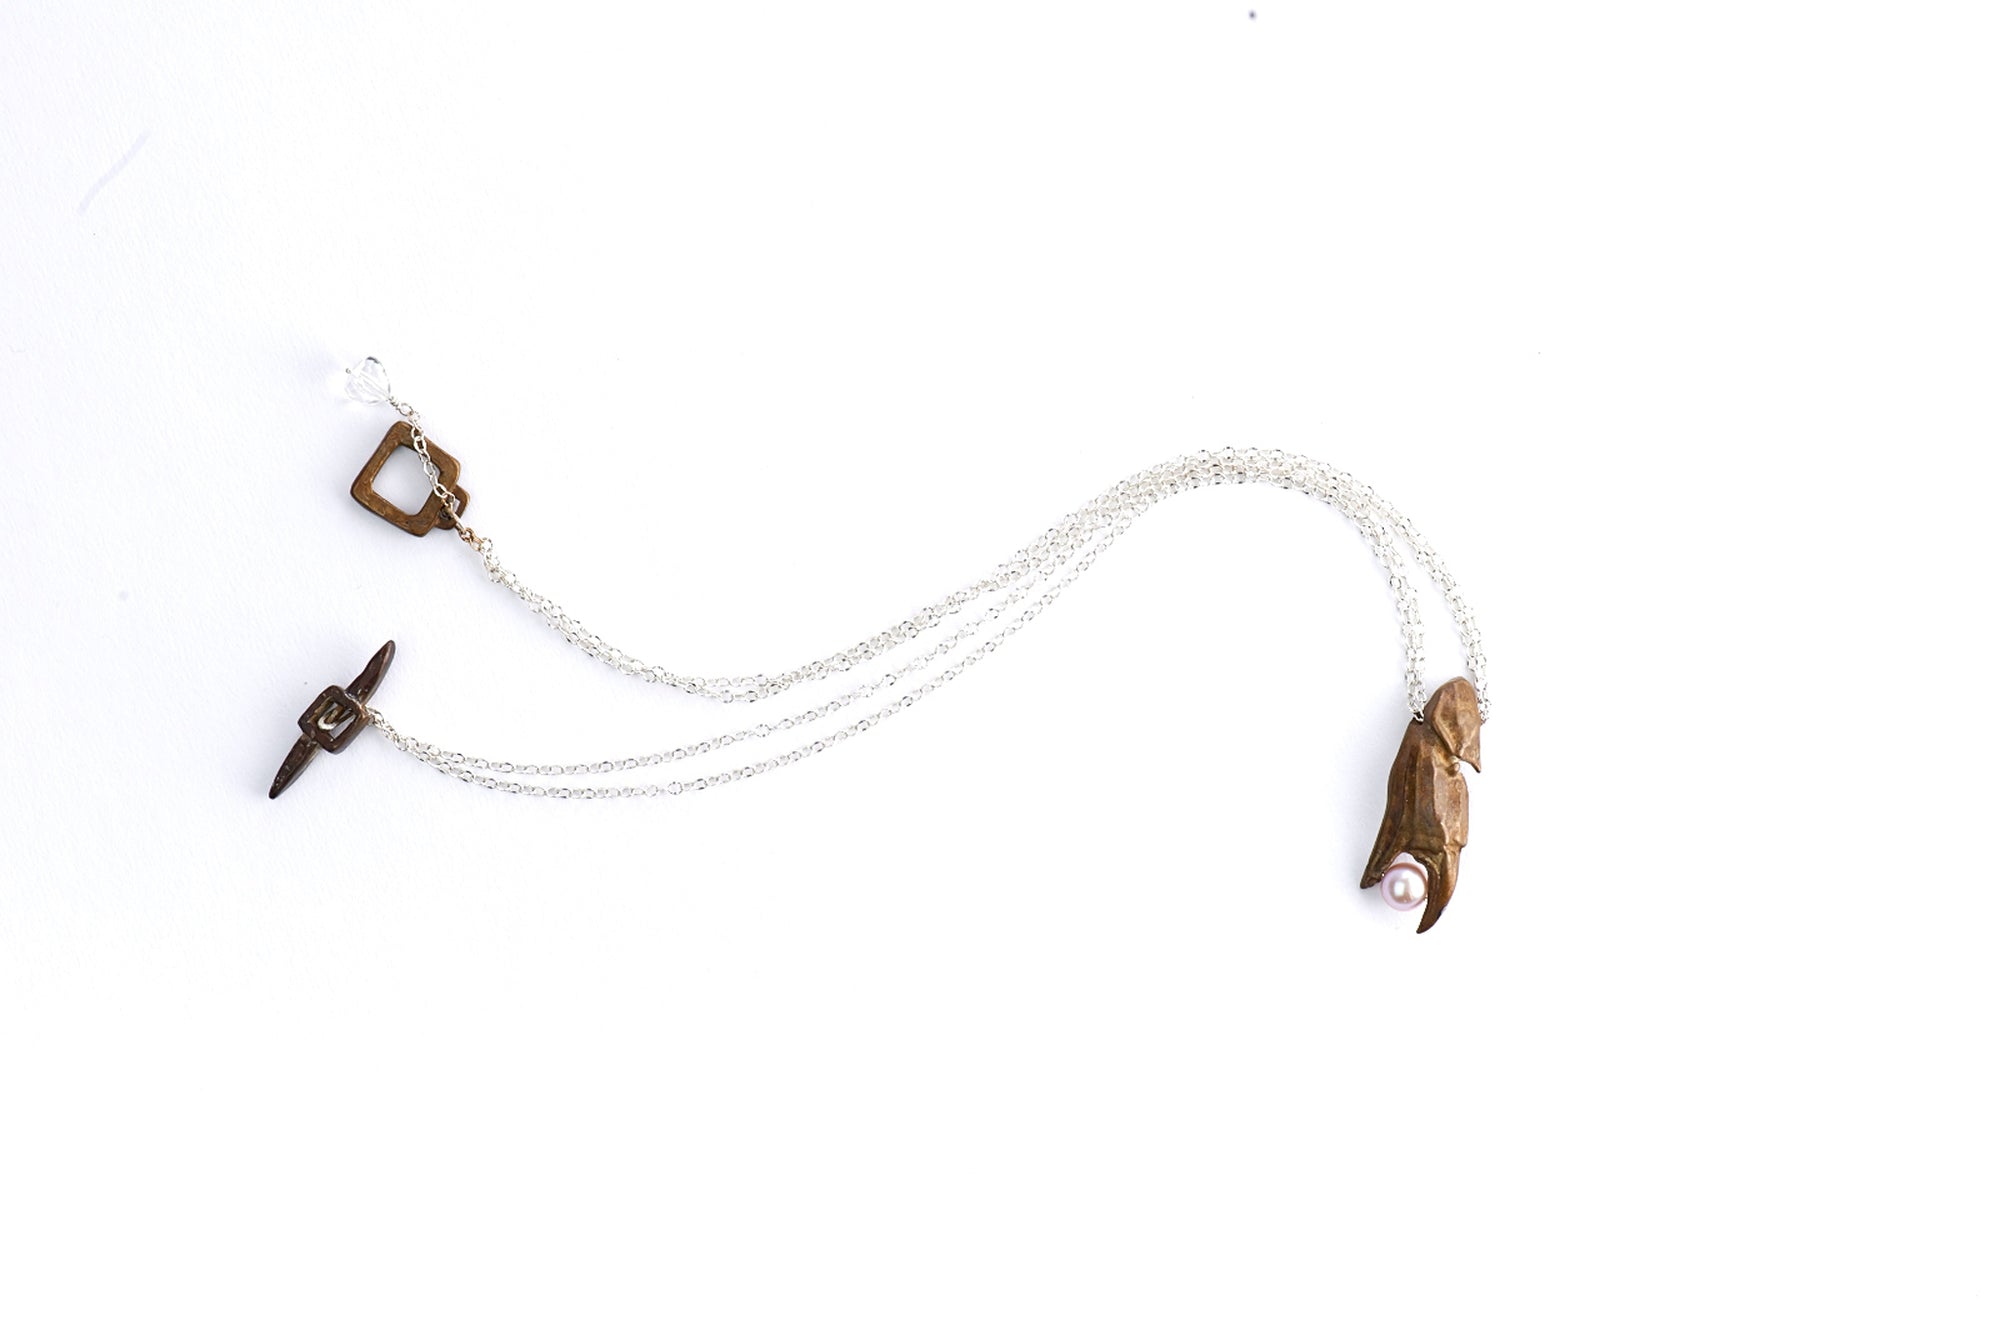 Open Crab Claw Pendant with Pearl